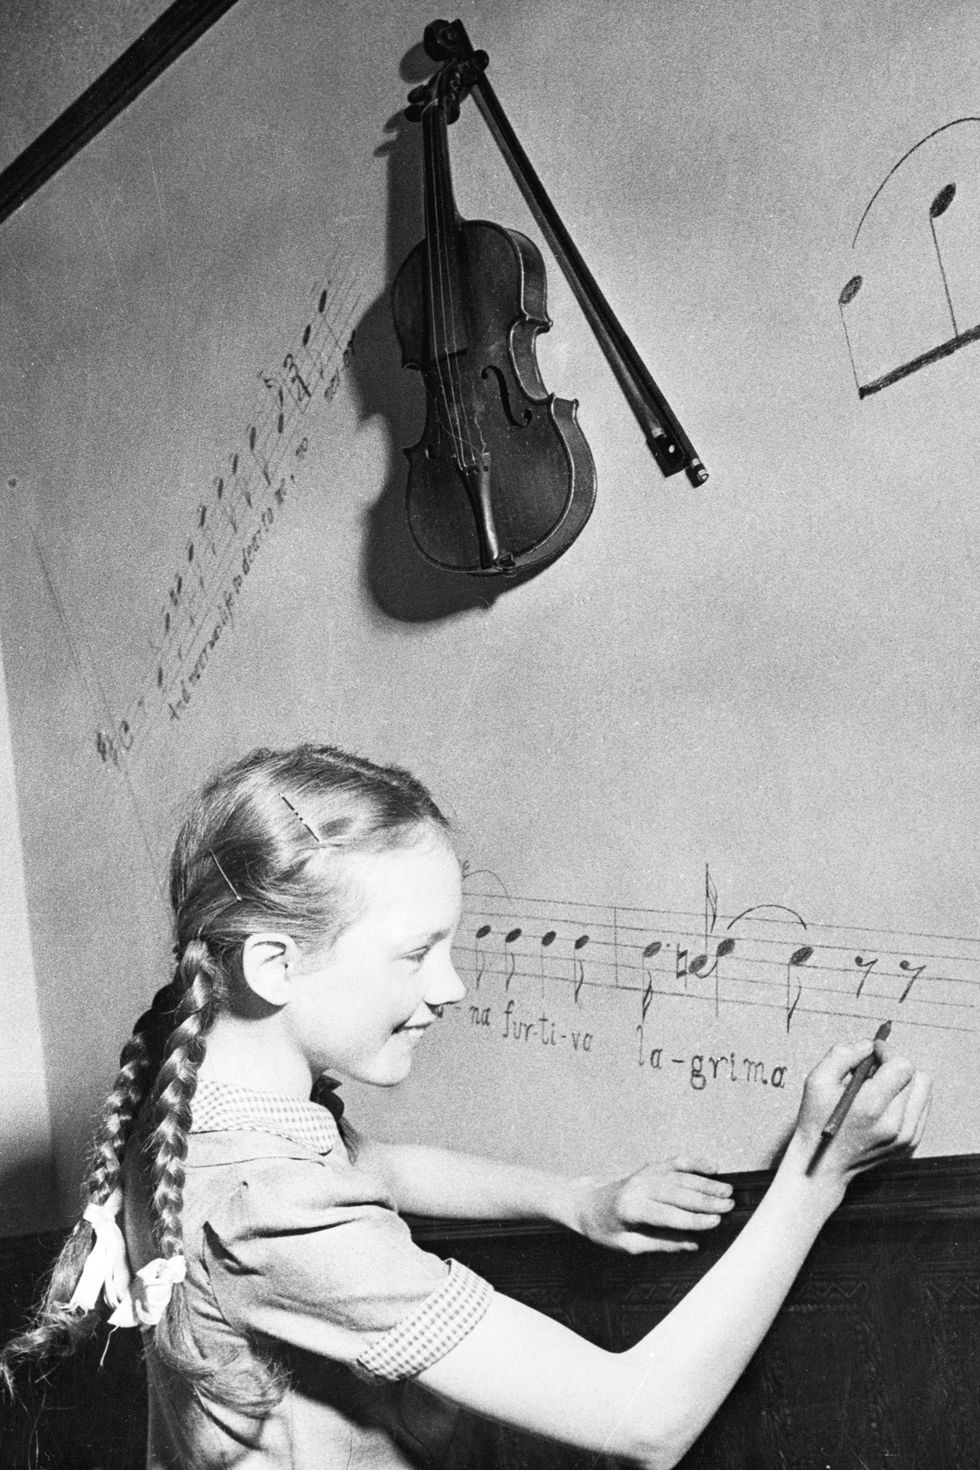 julie andrews writing music on wall